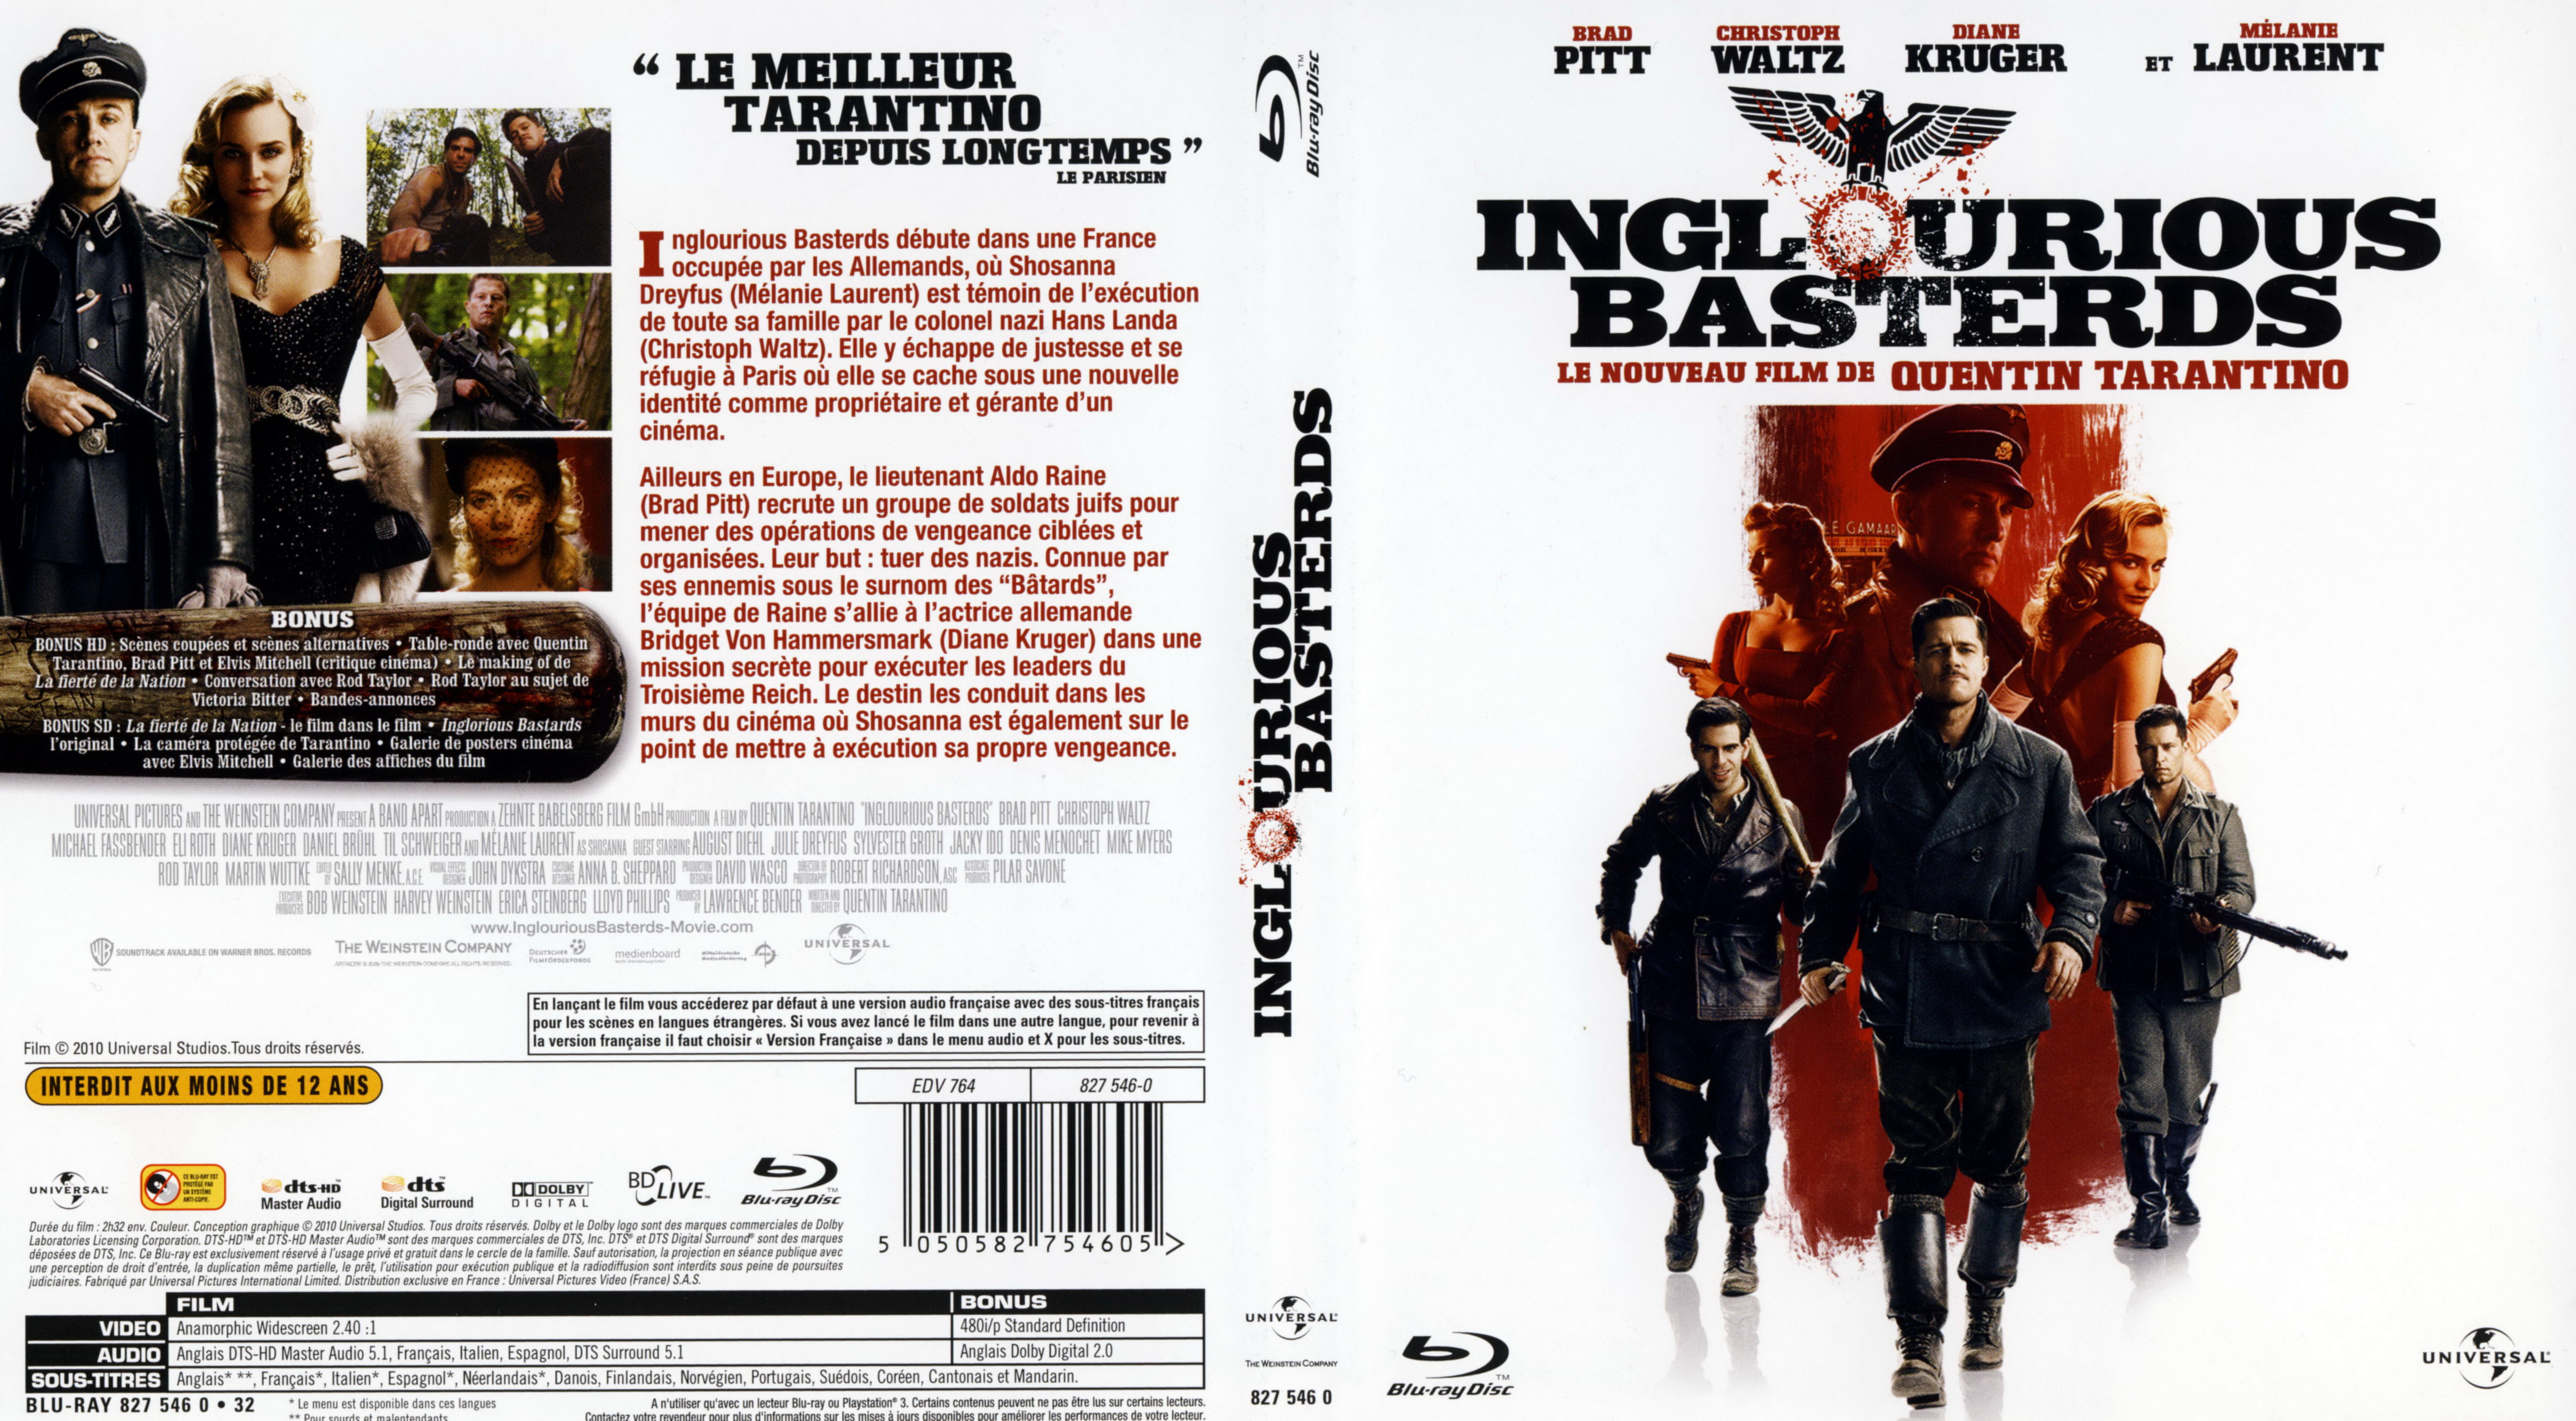 Jaquette DVD Inglourious basterds (BLU-RAY) v2